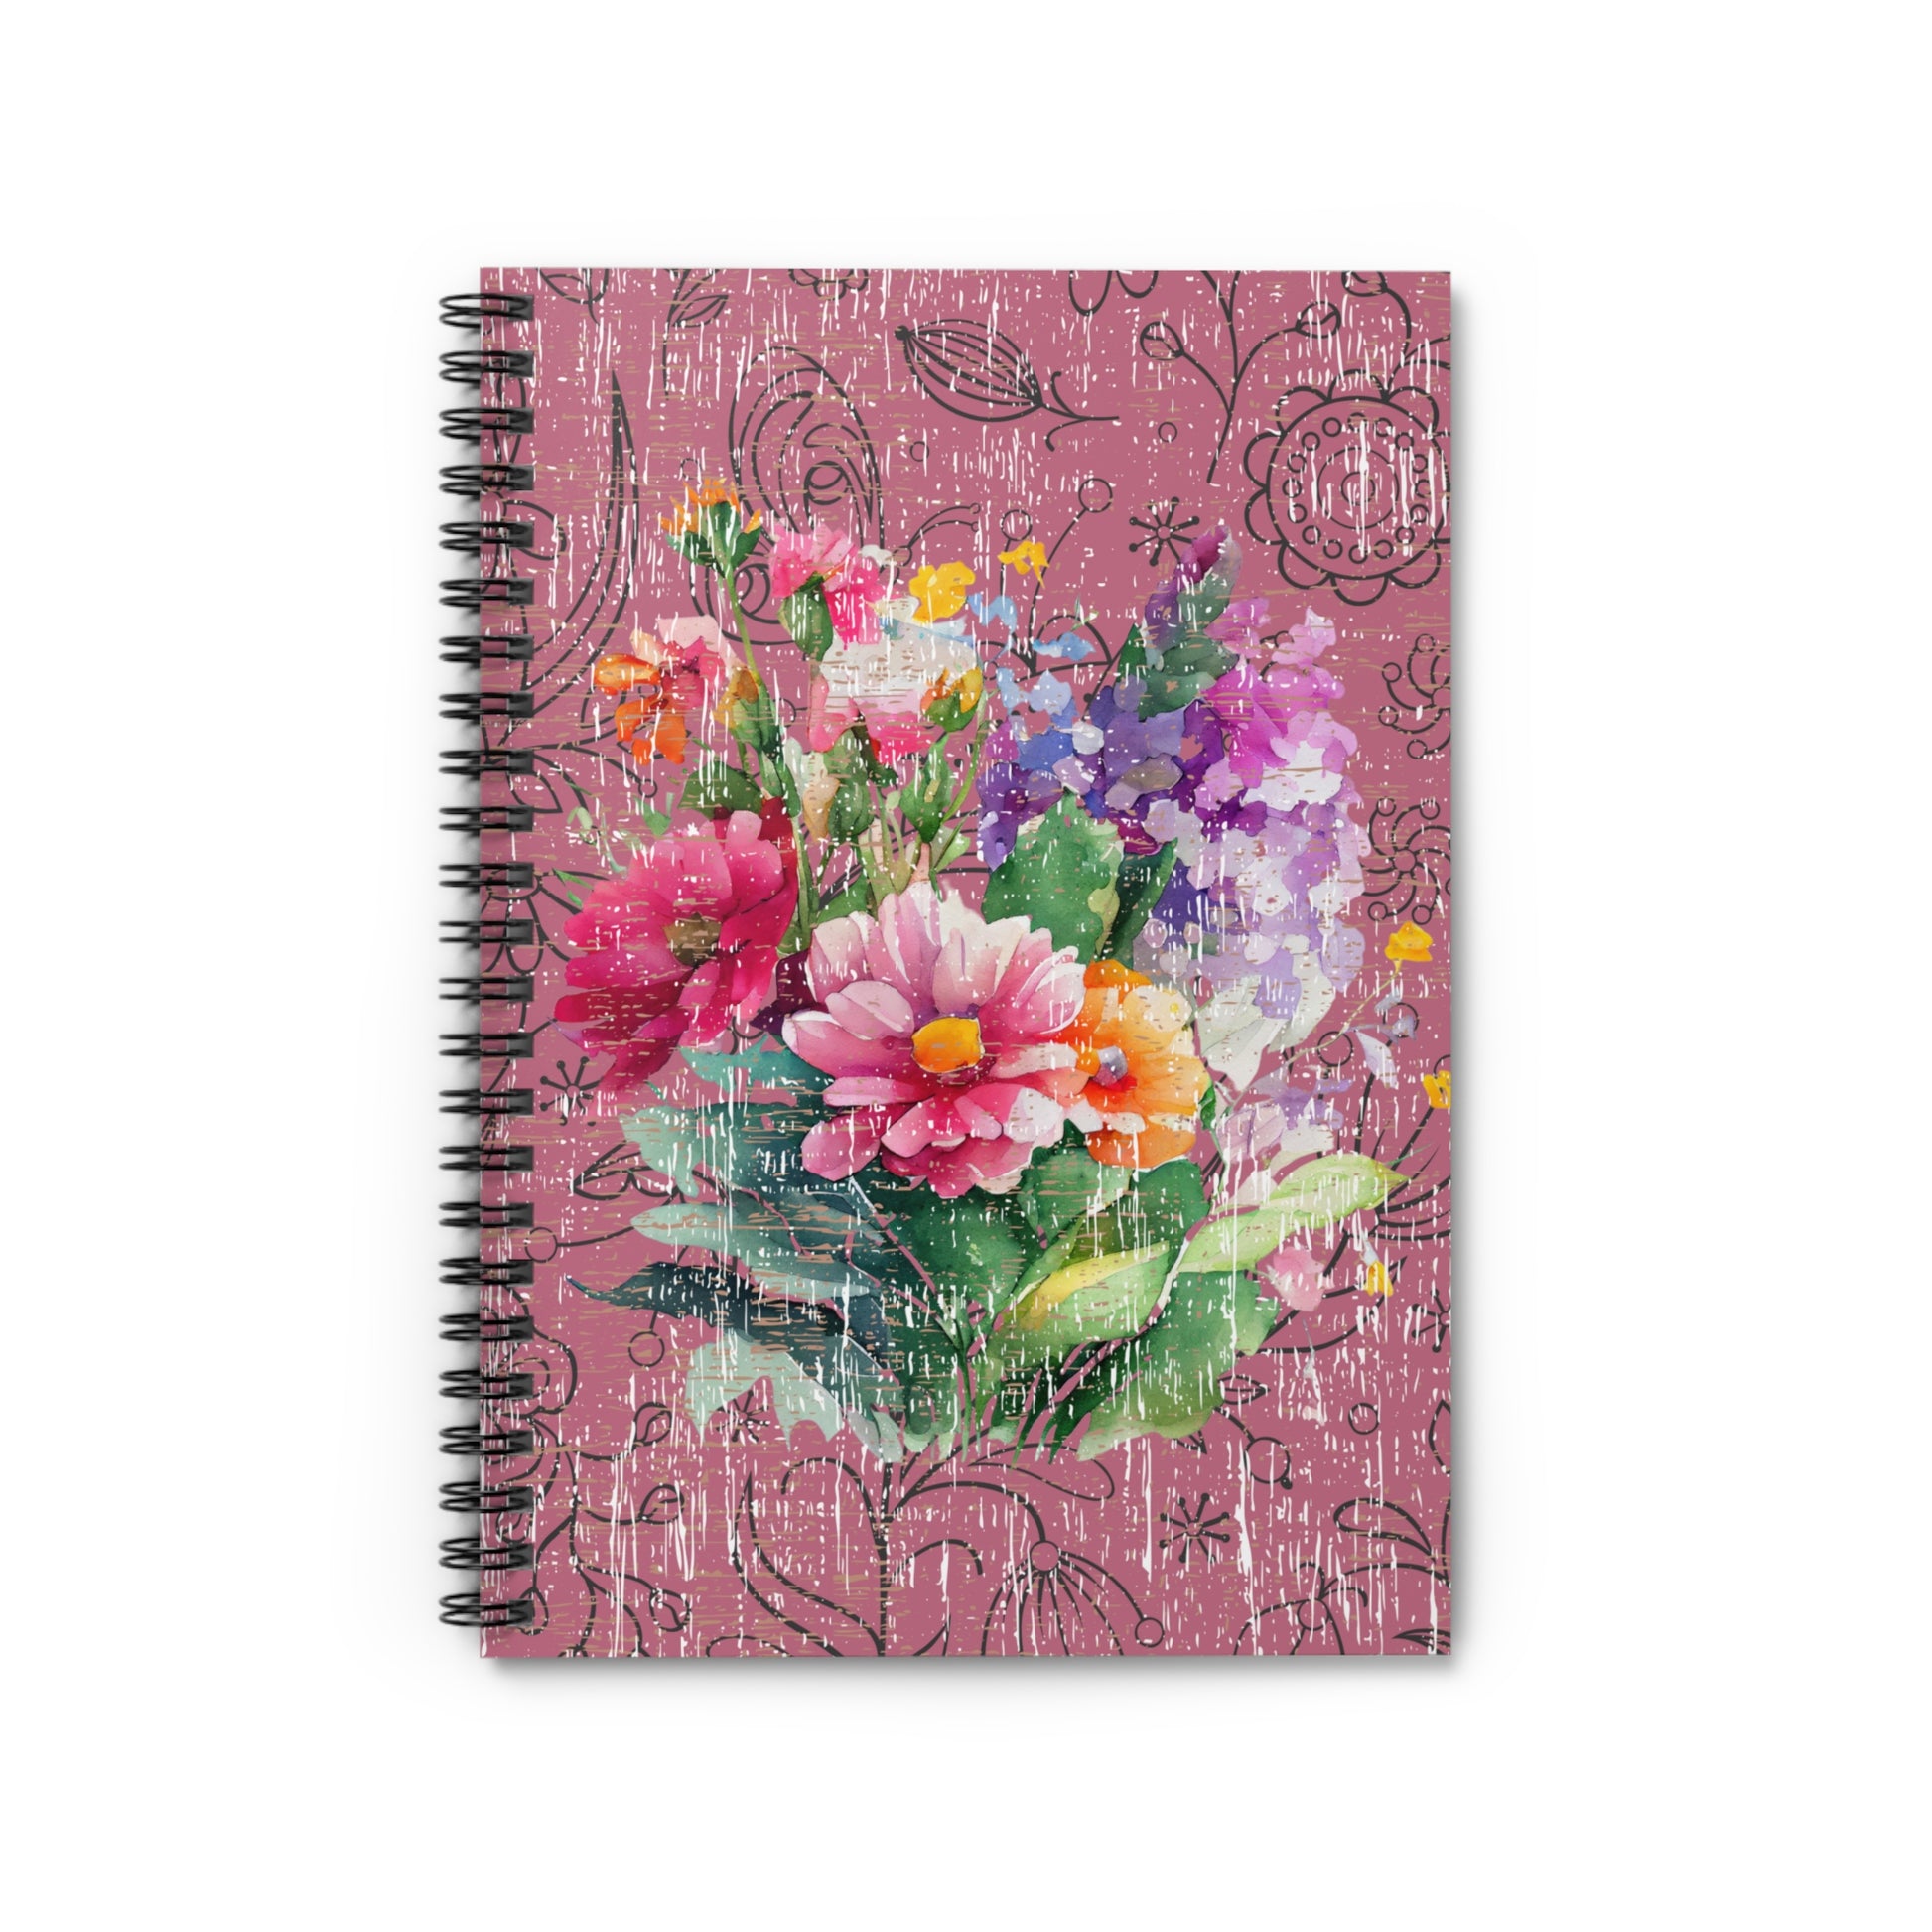 Rose-Colored Vintage Bliss: Floral Spiral Notebook for Elegant Writing and Creative Inspiration - Eddy and Rita